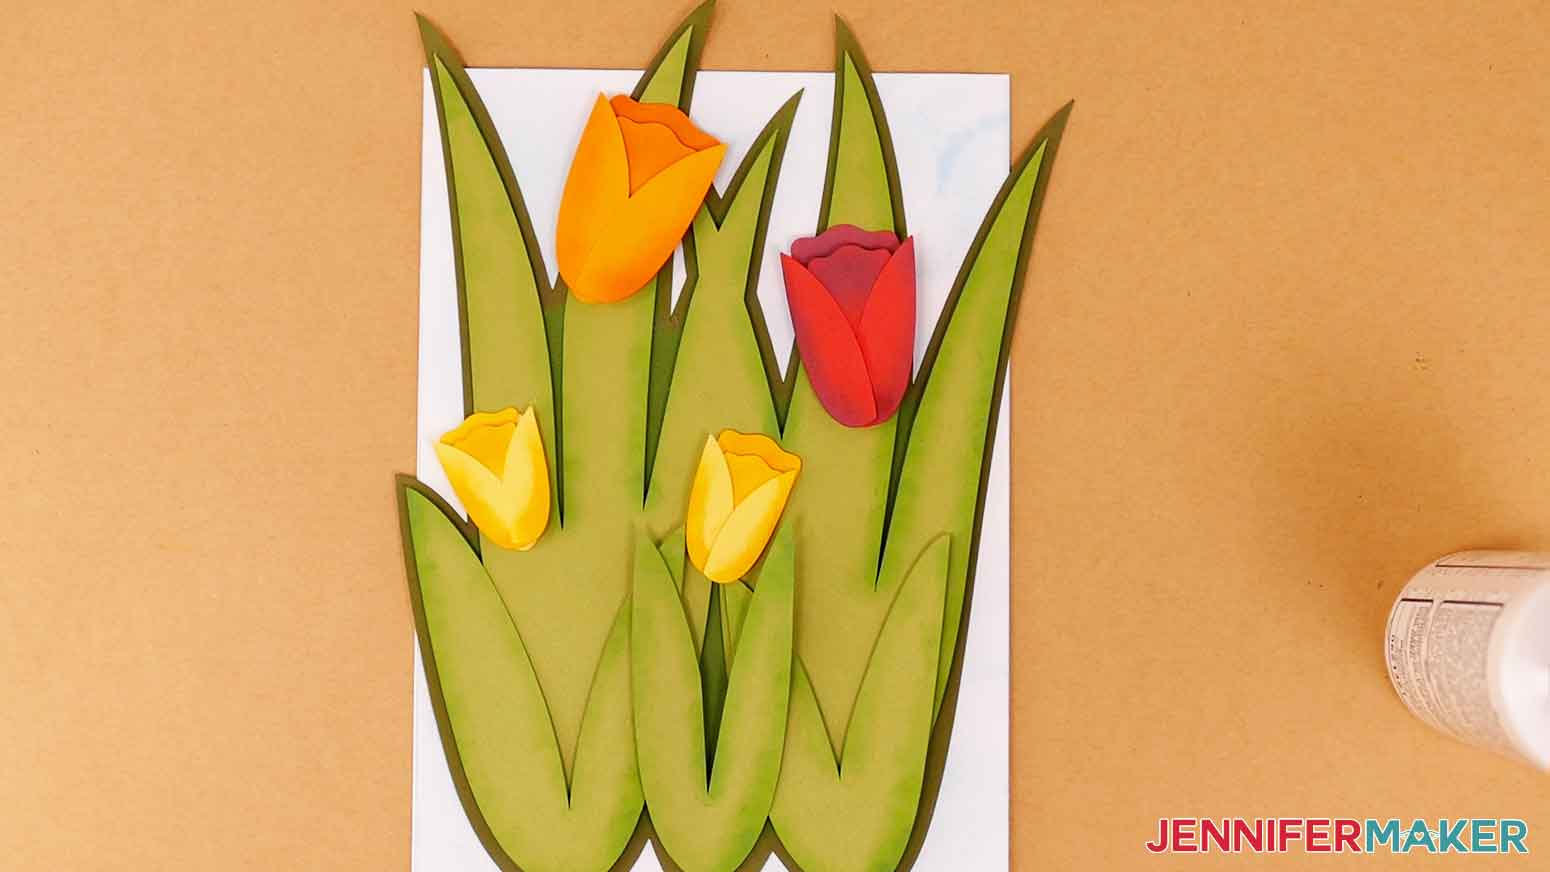 Tulip flowers arranges on leaves for visual placement.